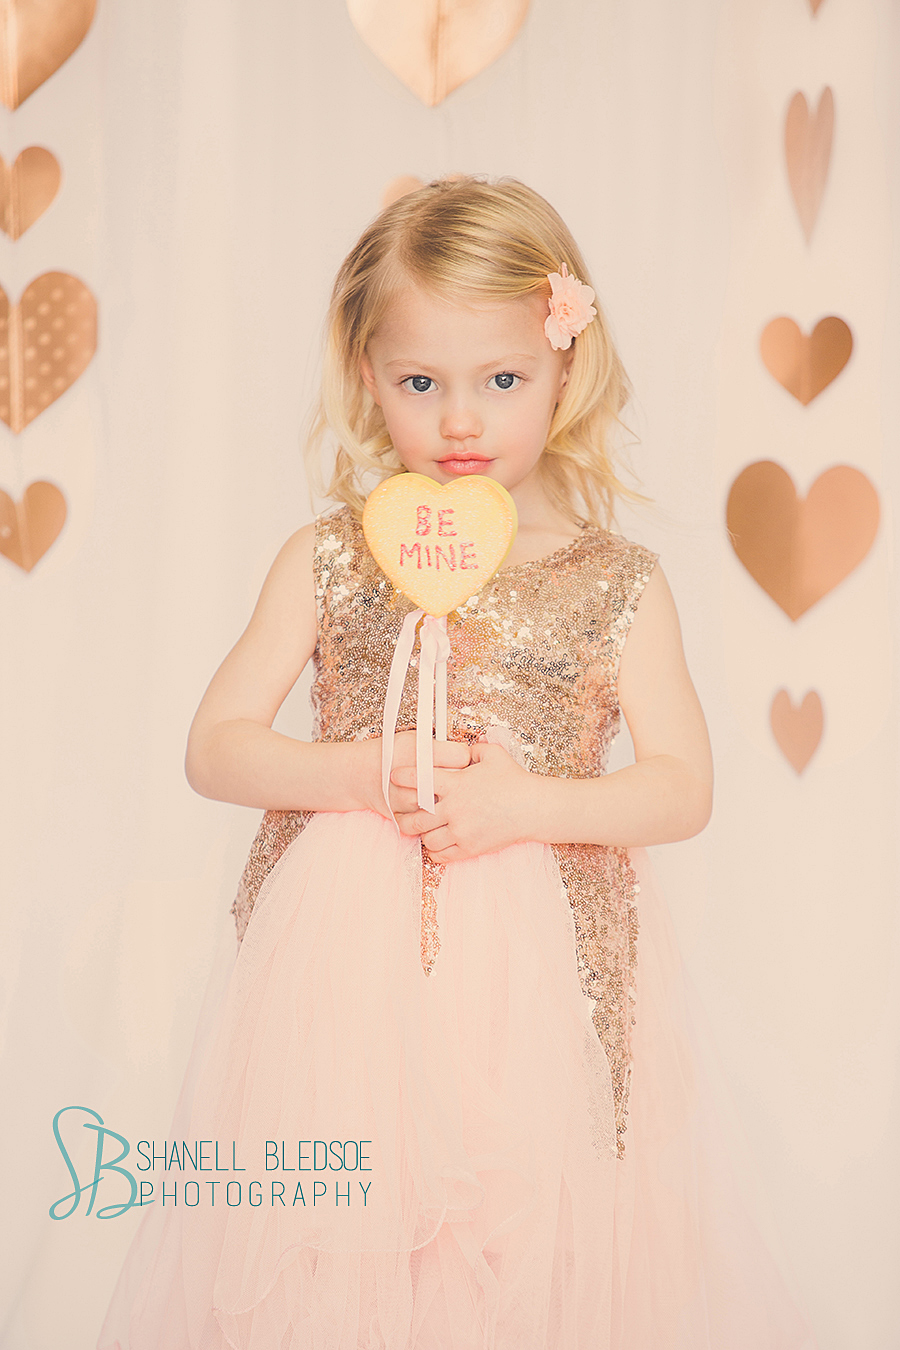 Little girls pink and gold kids Valentine's photo session in Knoxville. Shanell Bledsoe Photography